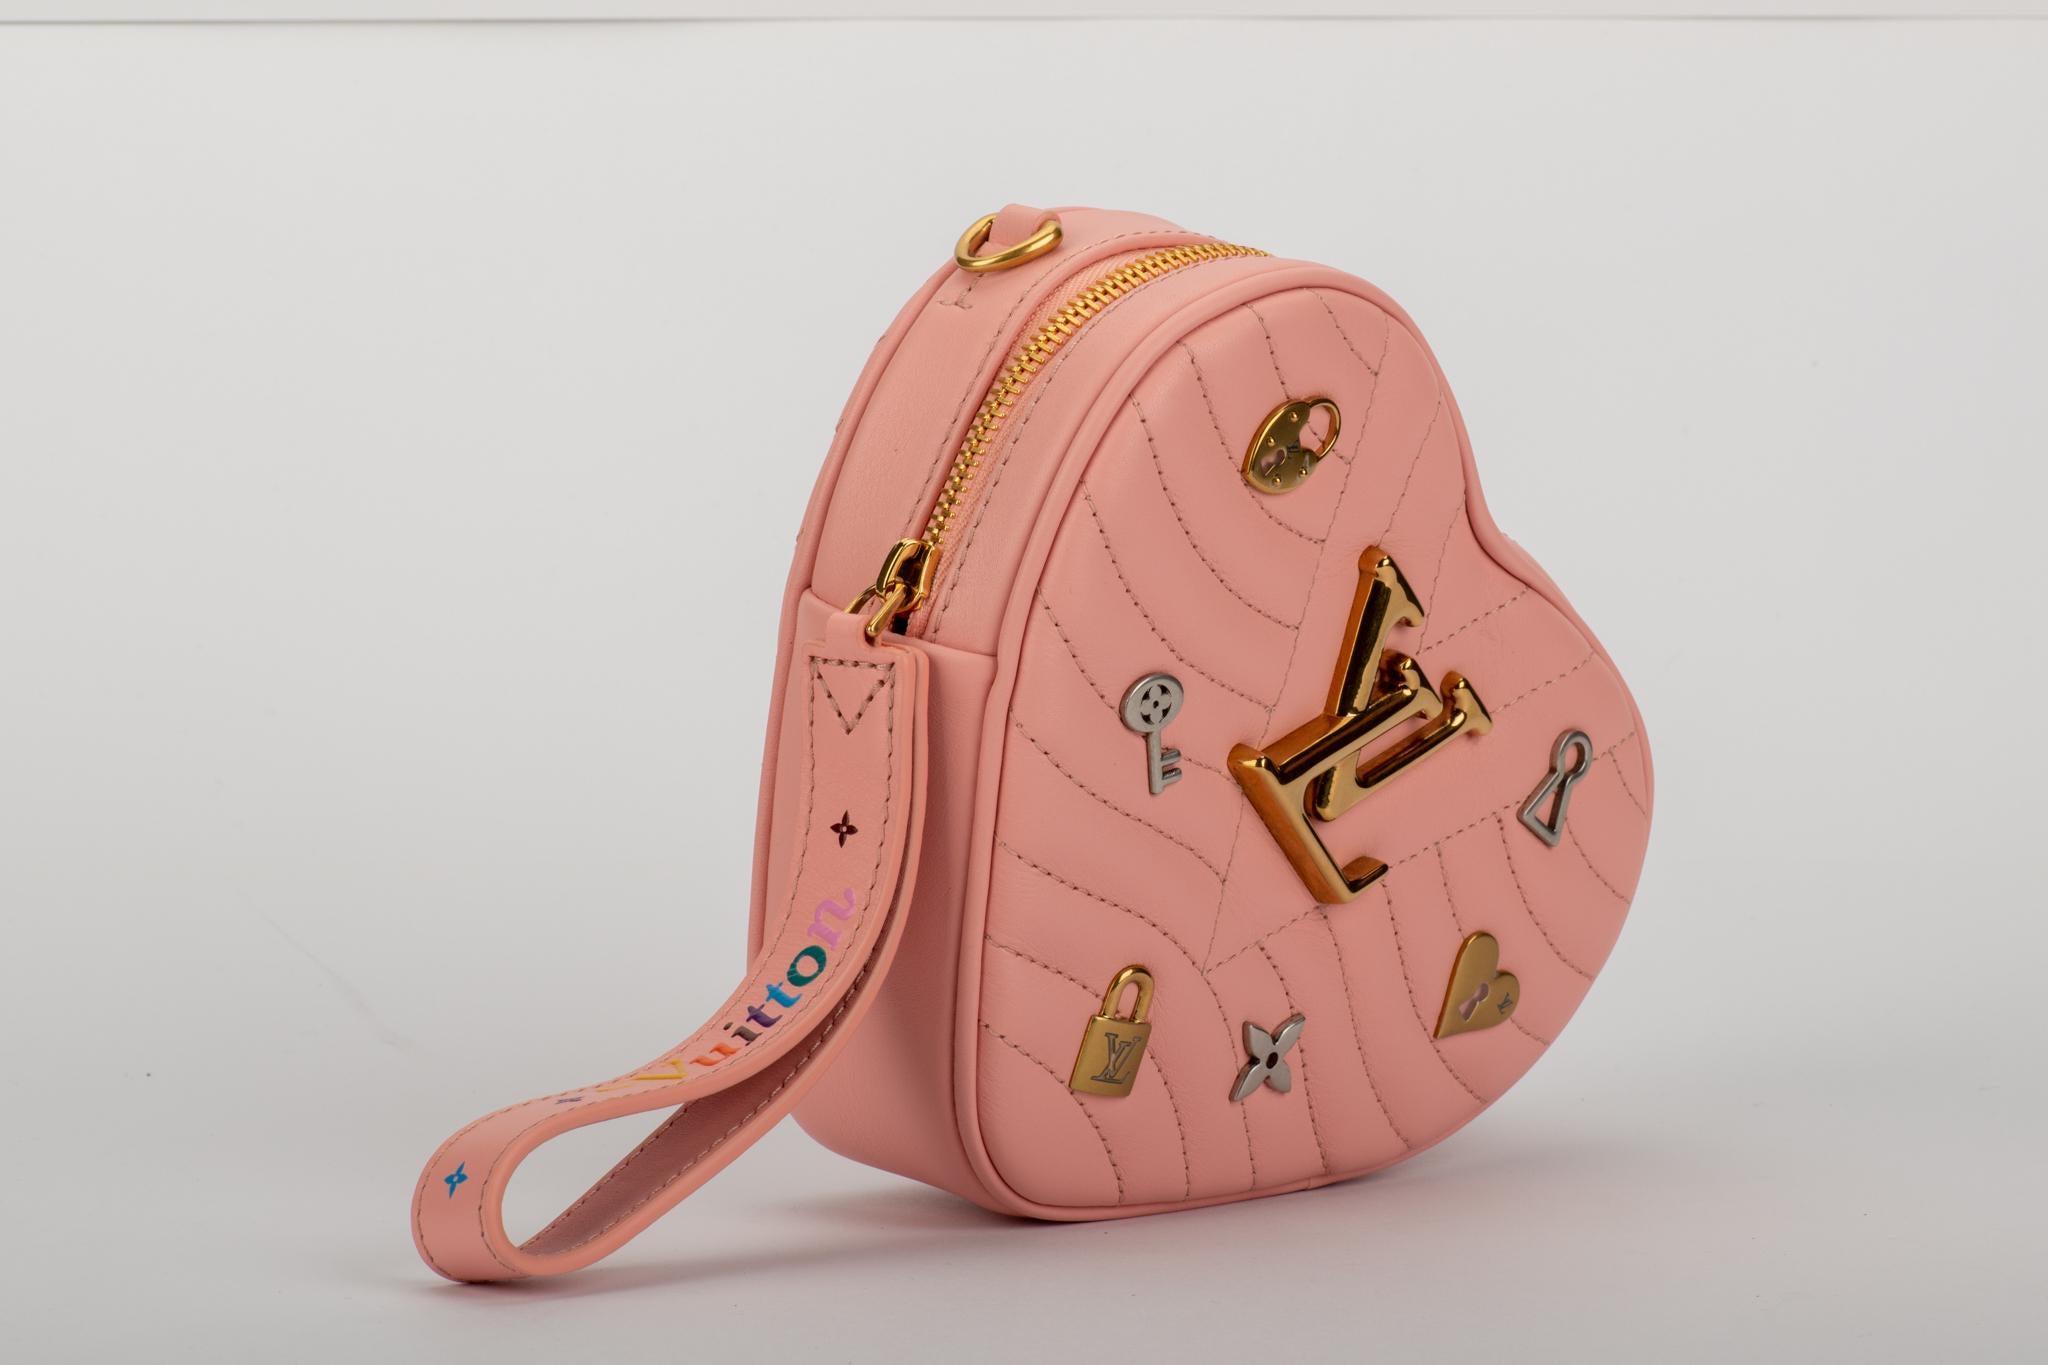 Louis Vuitton limited edition heart shape pink leather bag with logo silver and gold charms. Can we born as a clutch, waist bag or cross body bag. Shoulder strap 20